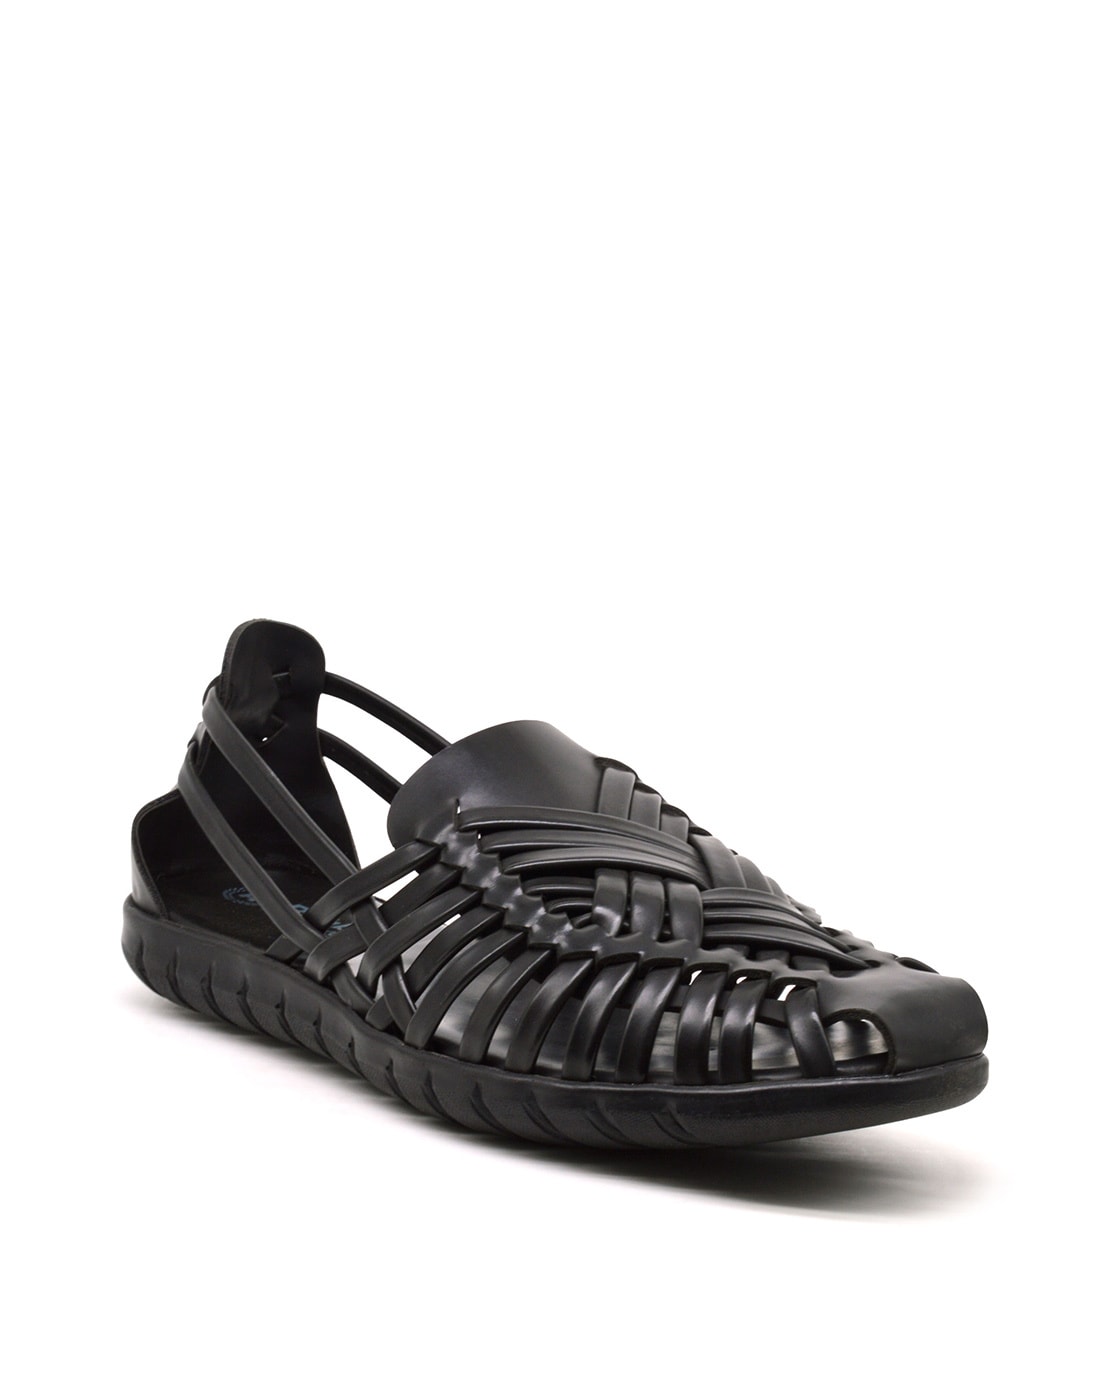 ASOS Woven Sandals in Black Leather | ASOS